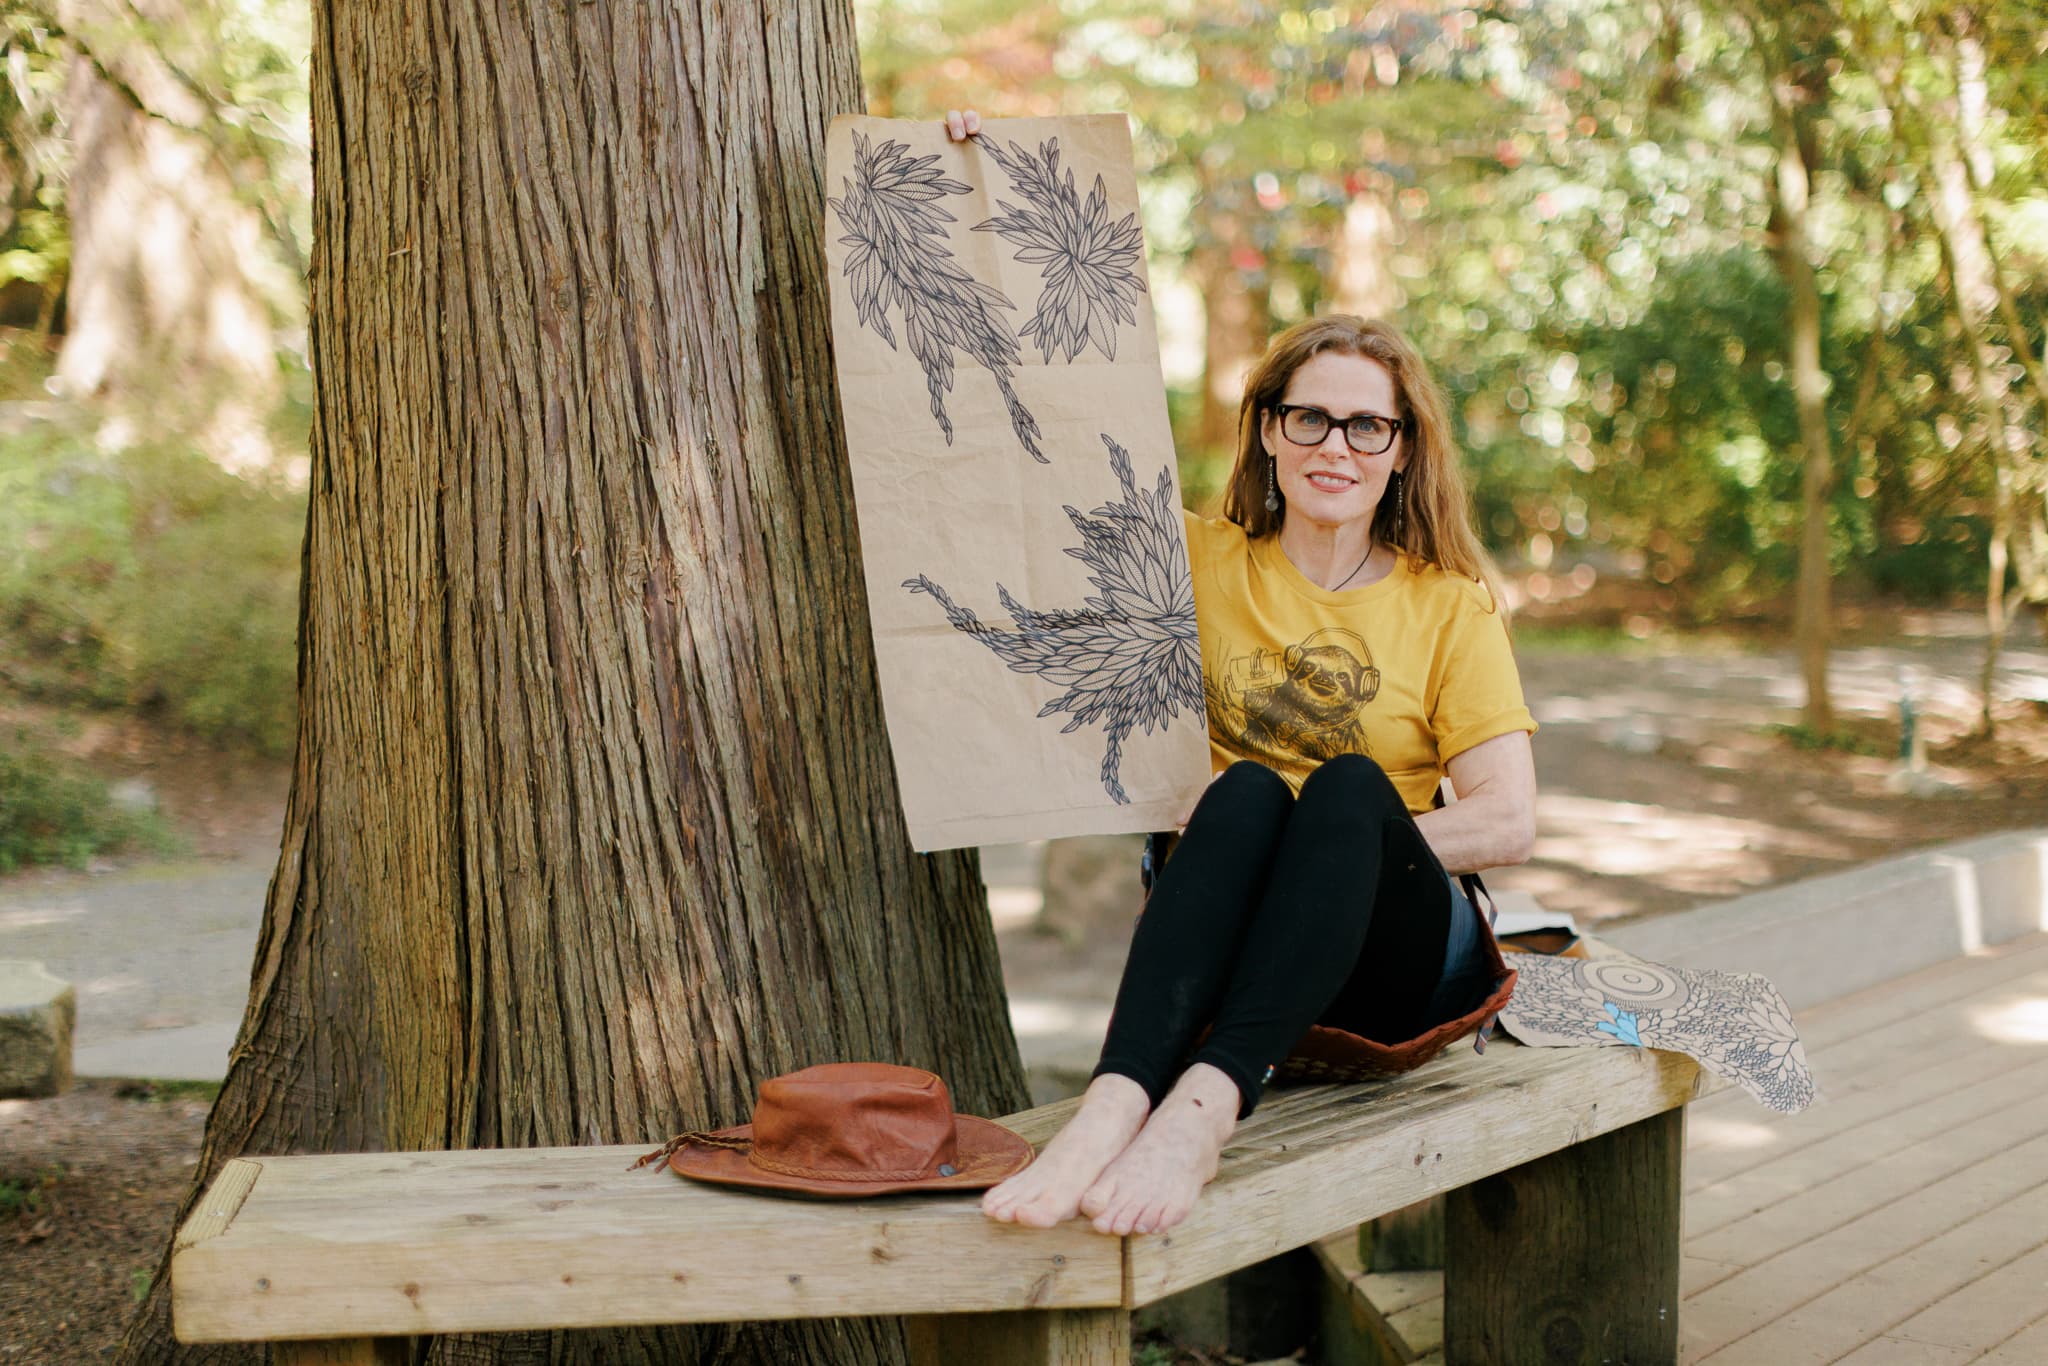 Crafting with Nature: Where PNW Artists Find Their Inspiration